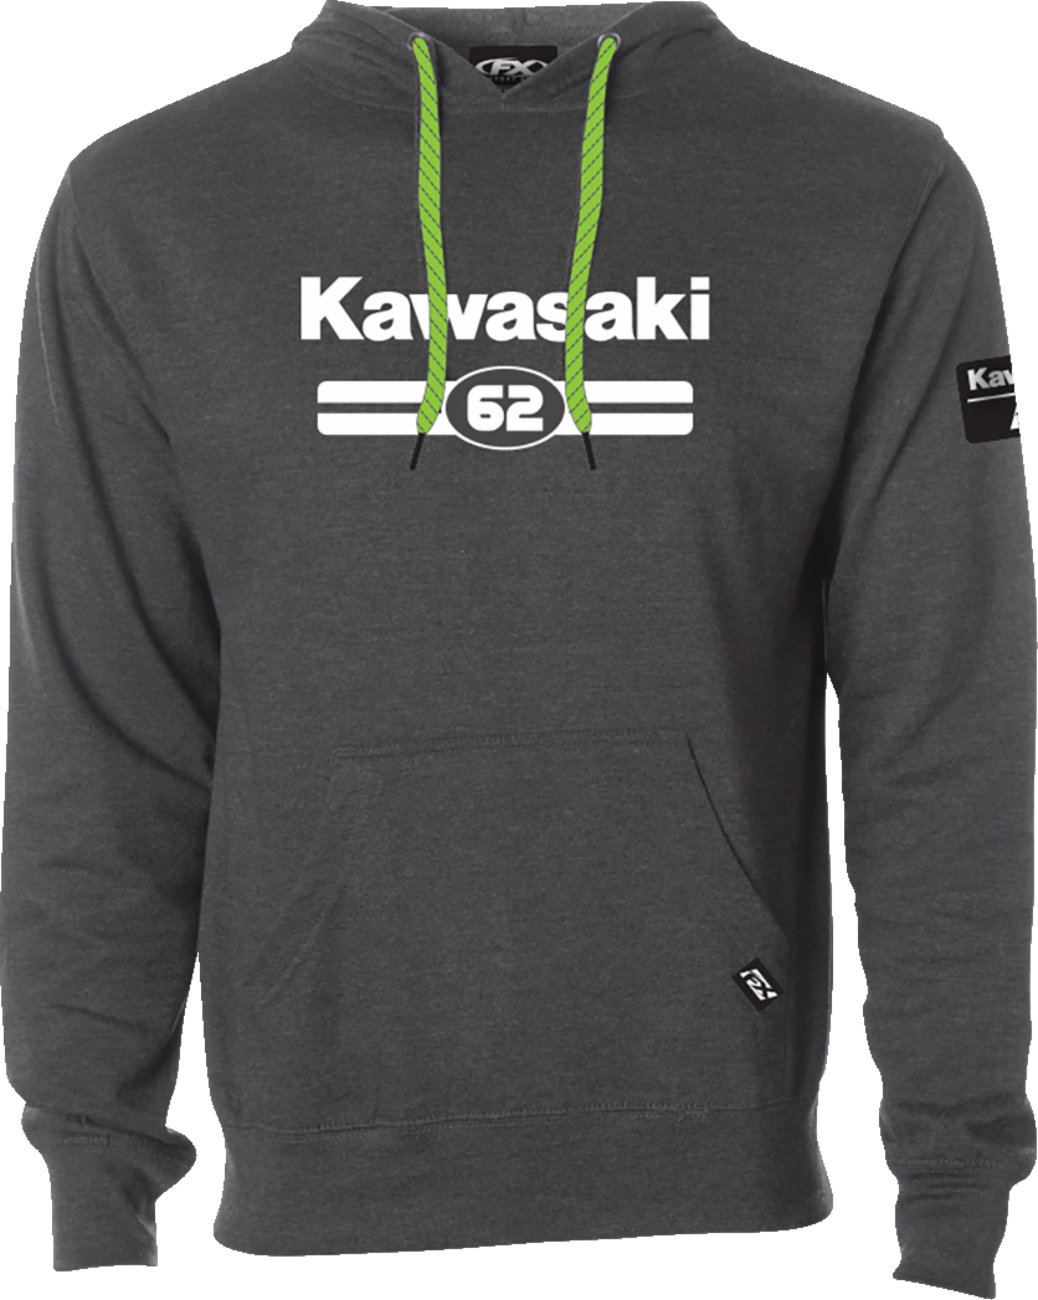 FACTORY EFFEX Kawasaki Sixty Two Pullover Hoodie - Heather Charcoal - 2XL 27-88108